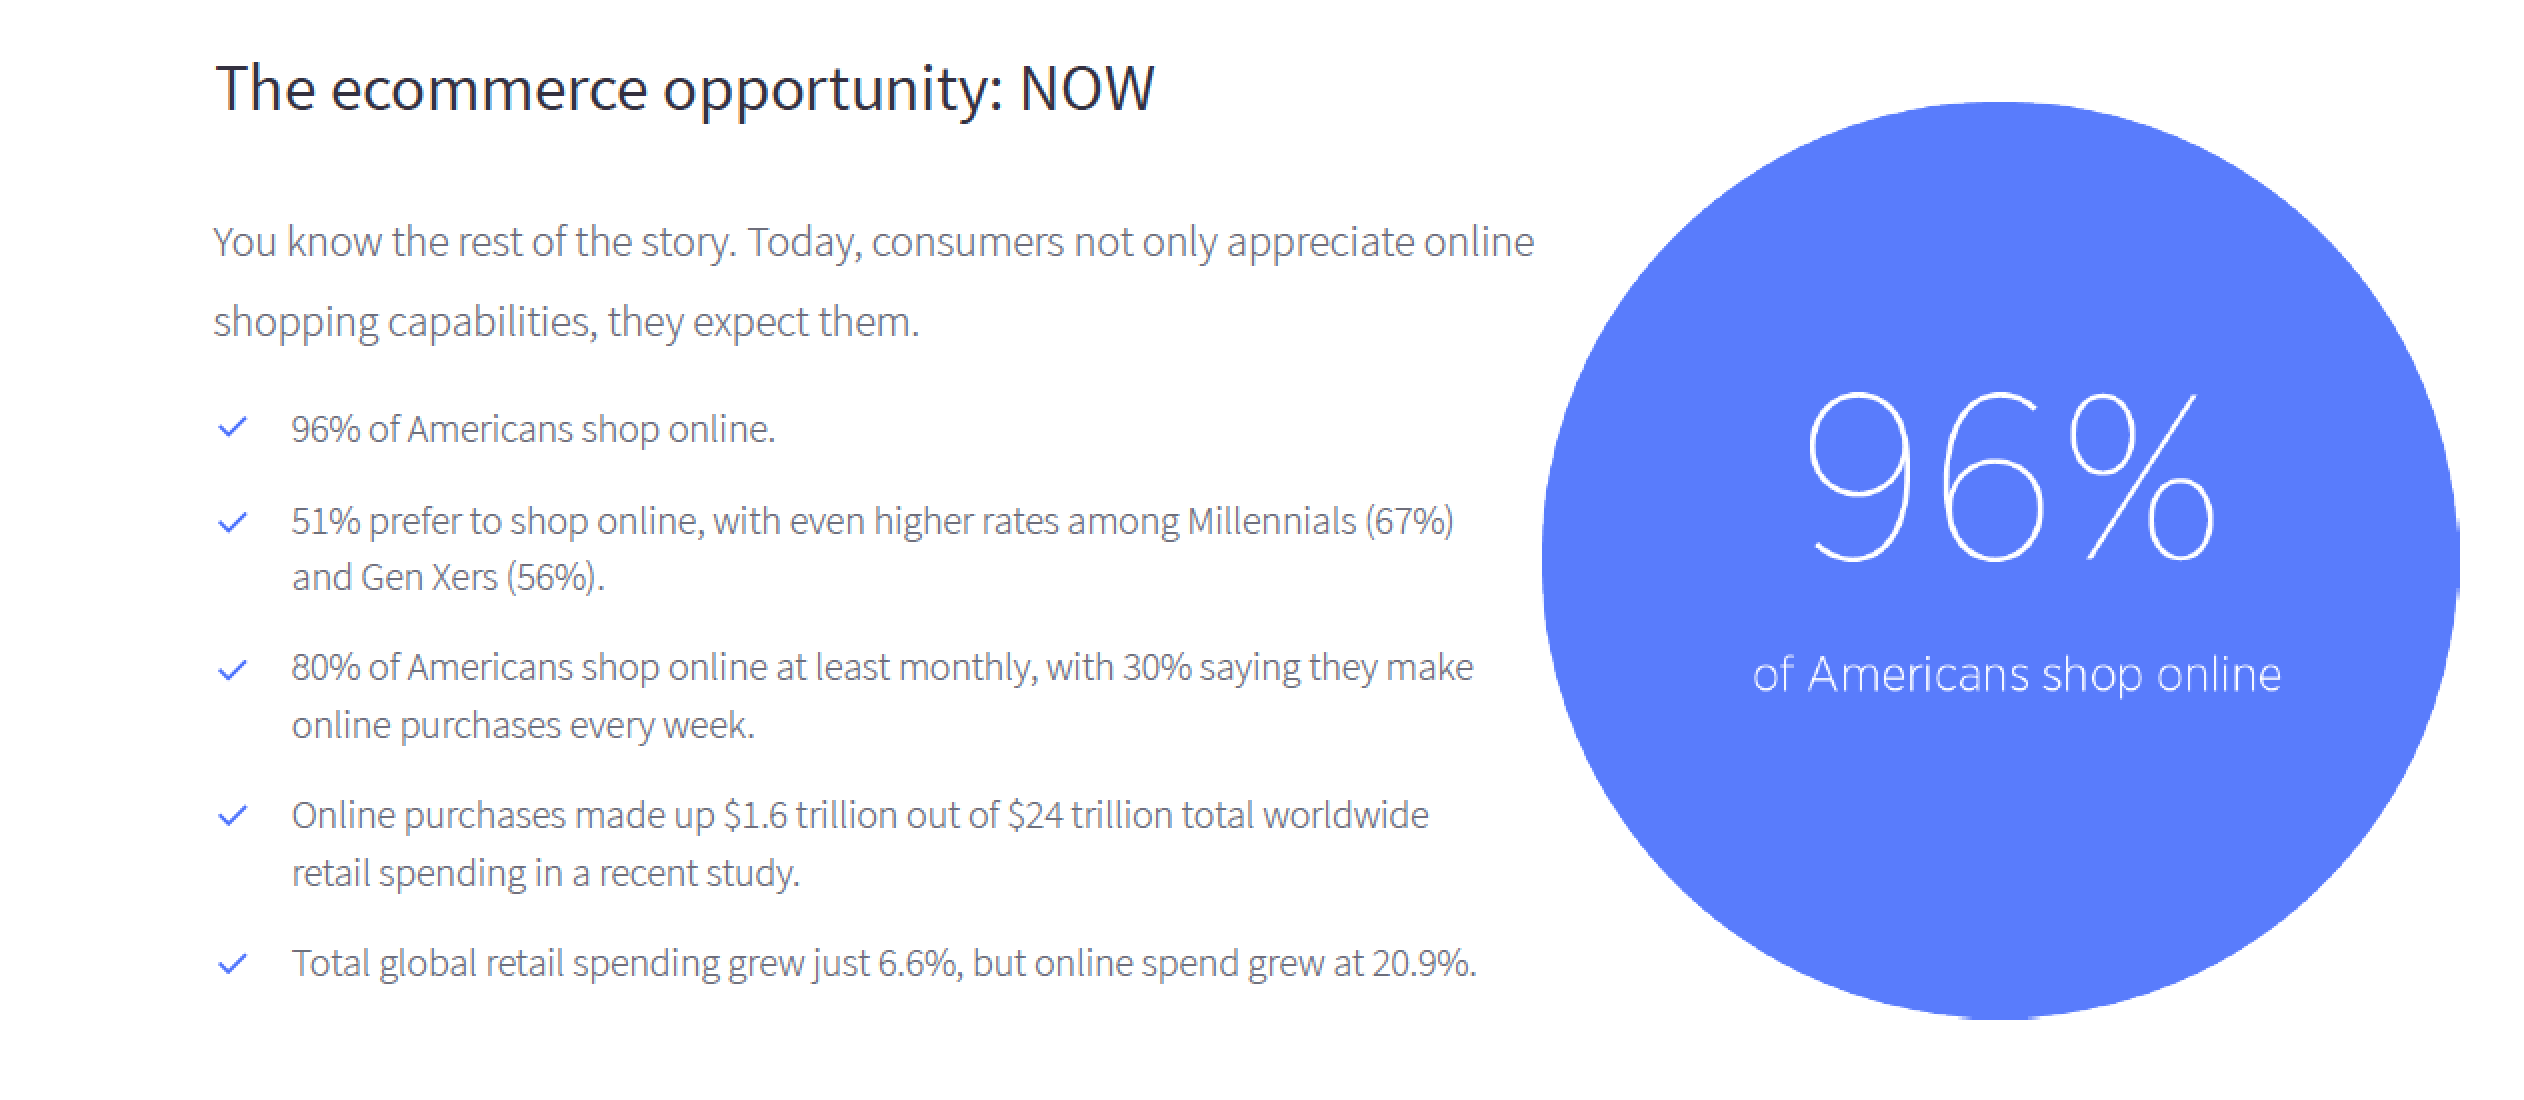 The eCommerce opportunity NOW